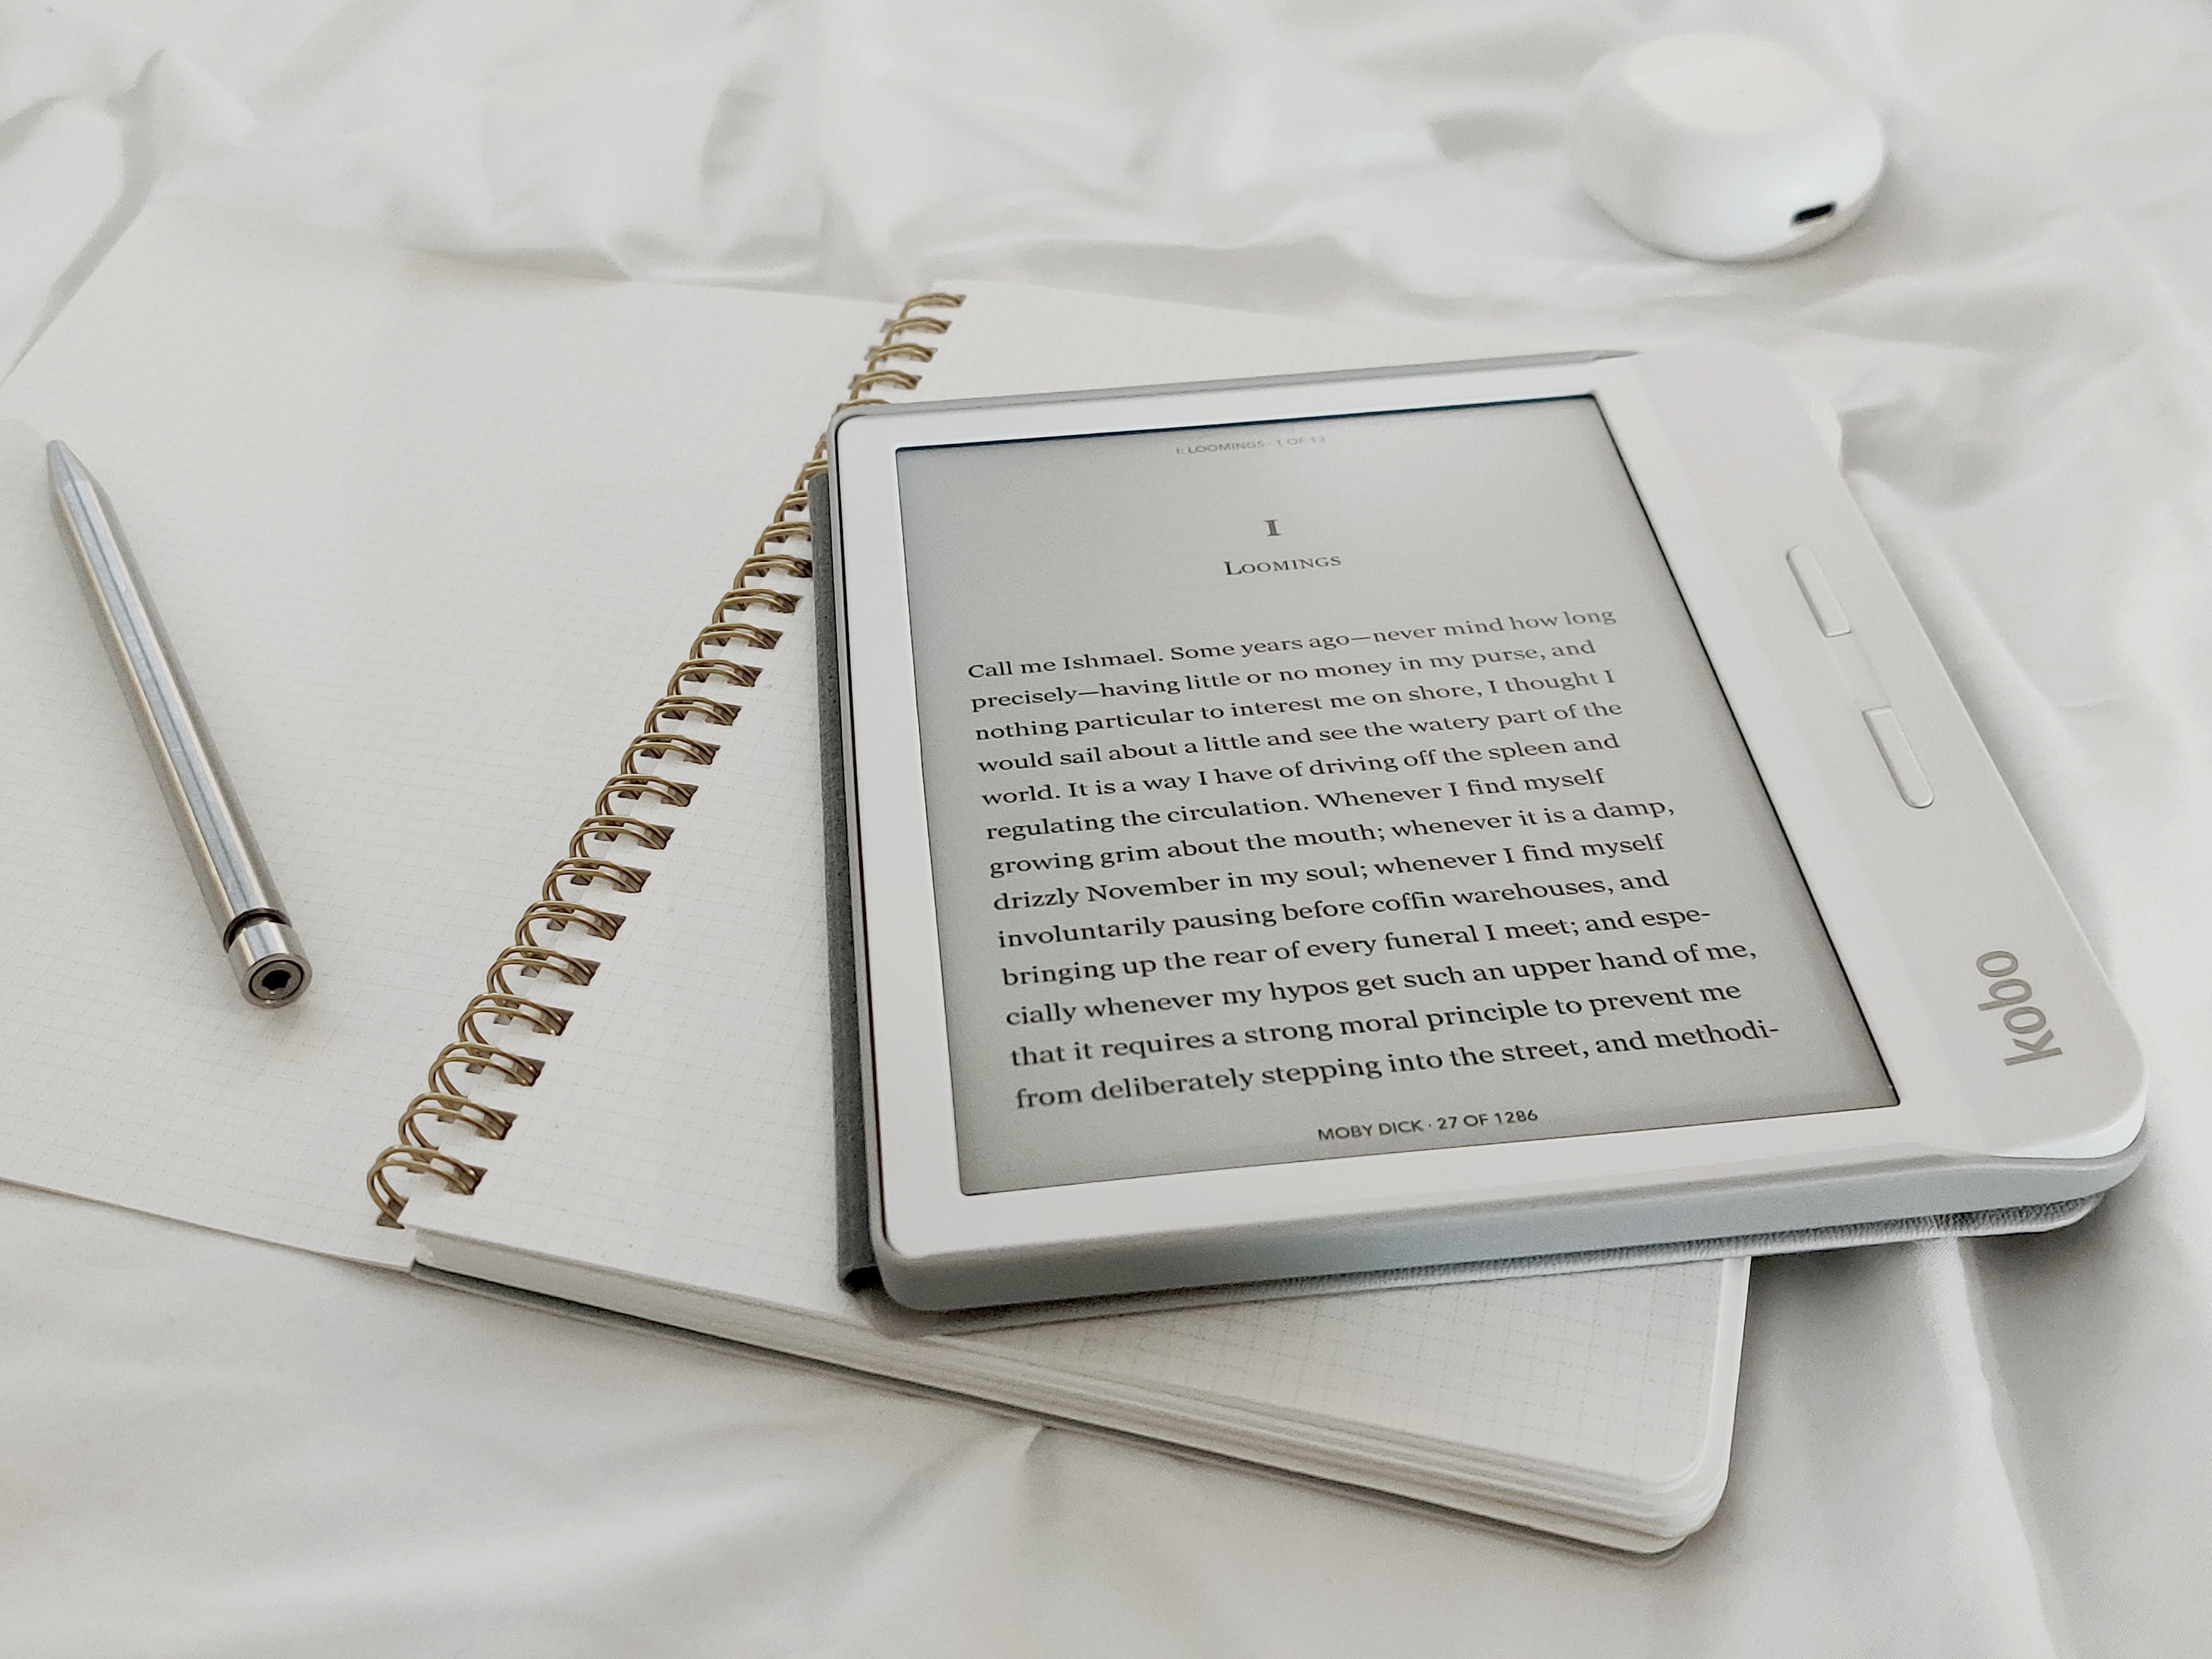 A white eReader with black text sits on top of an open and empty white journal. They are on a white sheet.